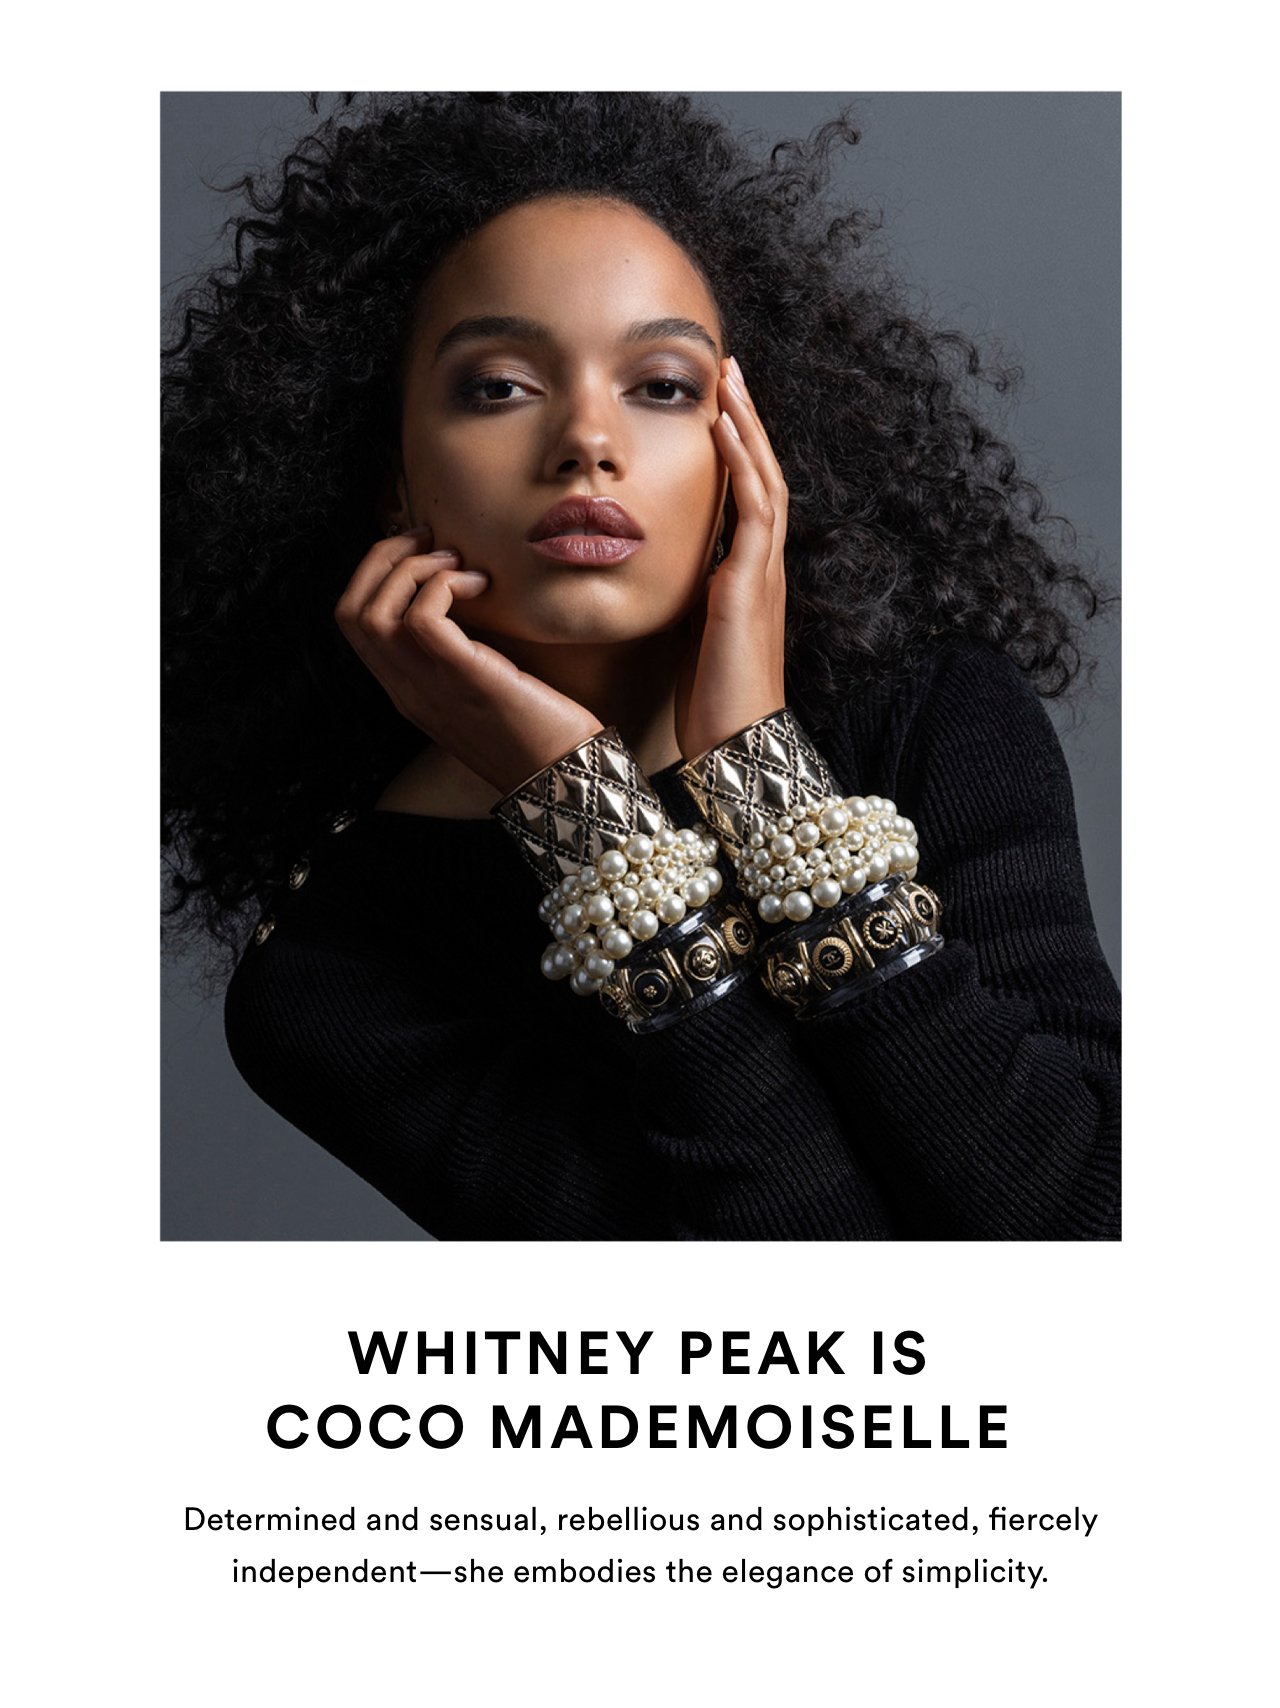 Whitney Peak is the New Face of COCO MADEMOISELLE